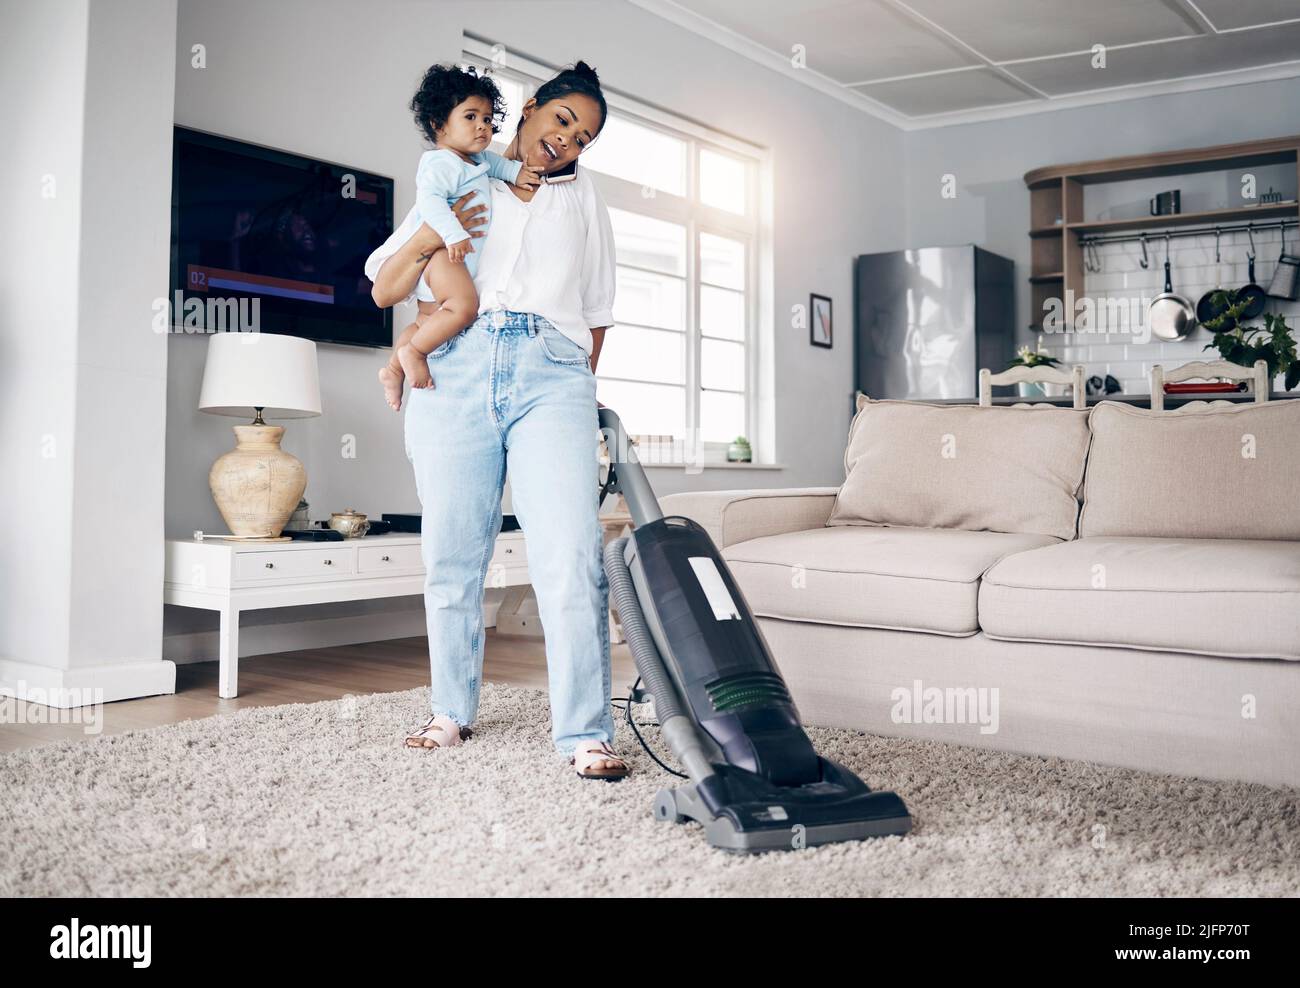 She does it all. Shot of a young mother using a cellphone while completing housework and holding her baby at home. Stock Photo